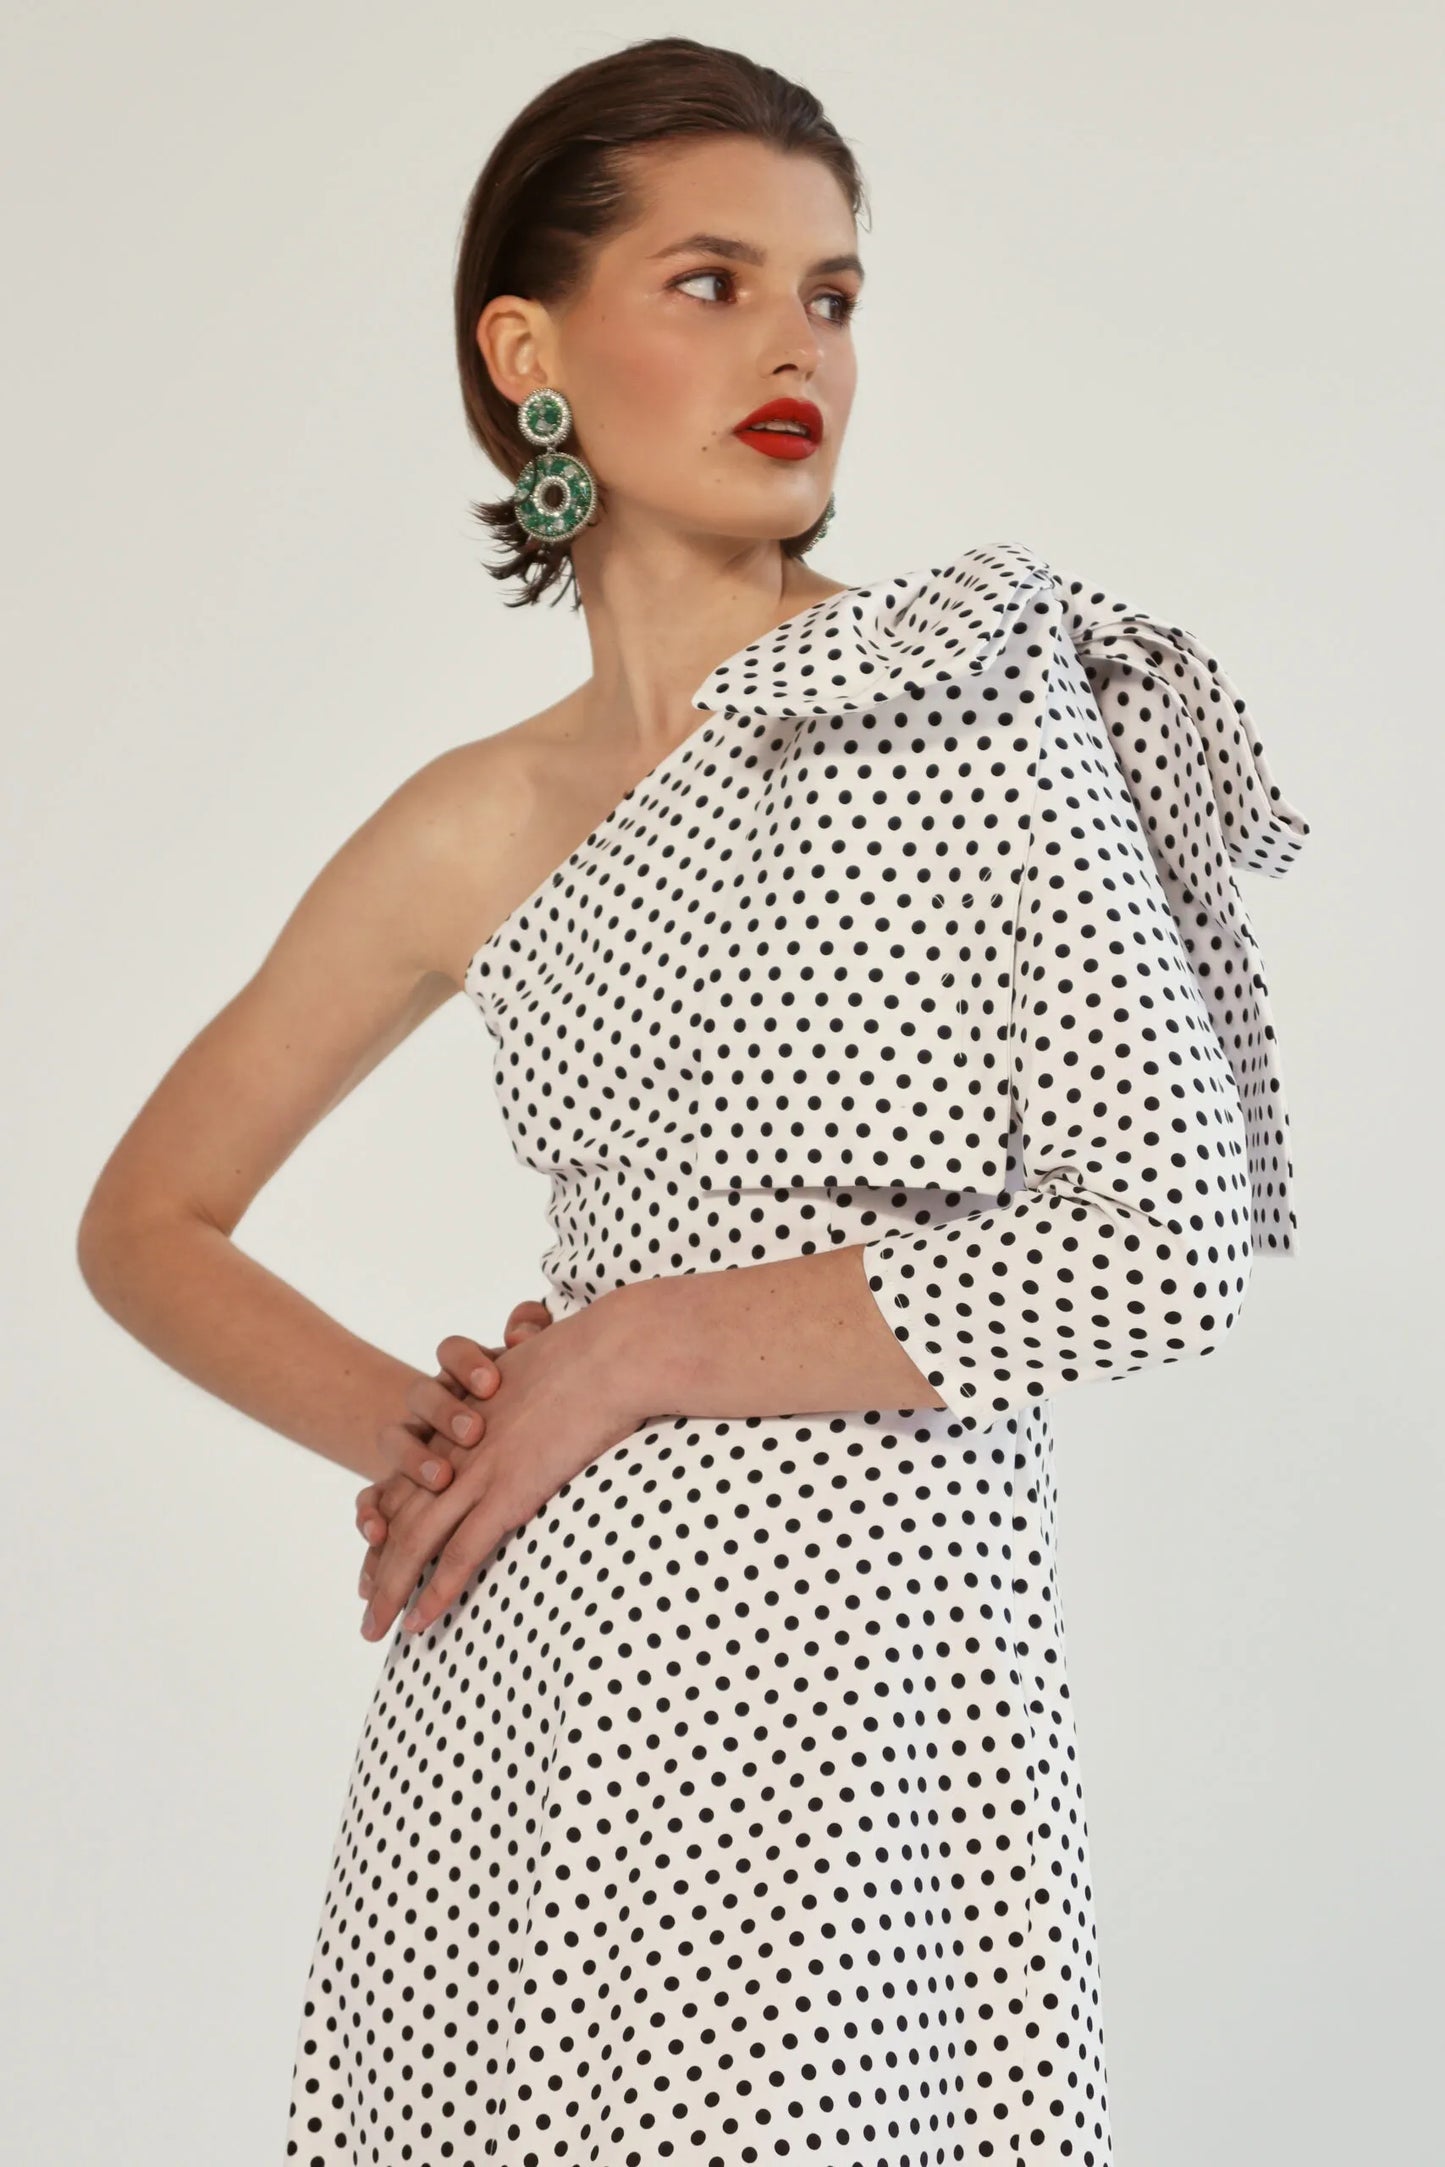 One-shoulder polka dot dress with a bow - Love by Ksenia at LabelRow